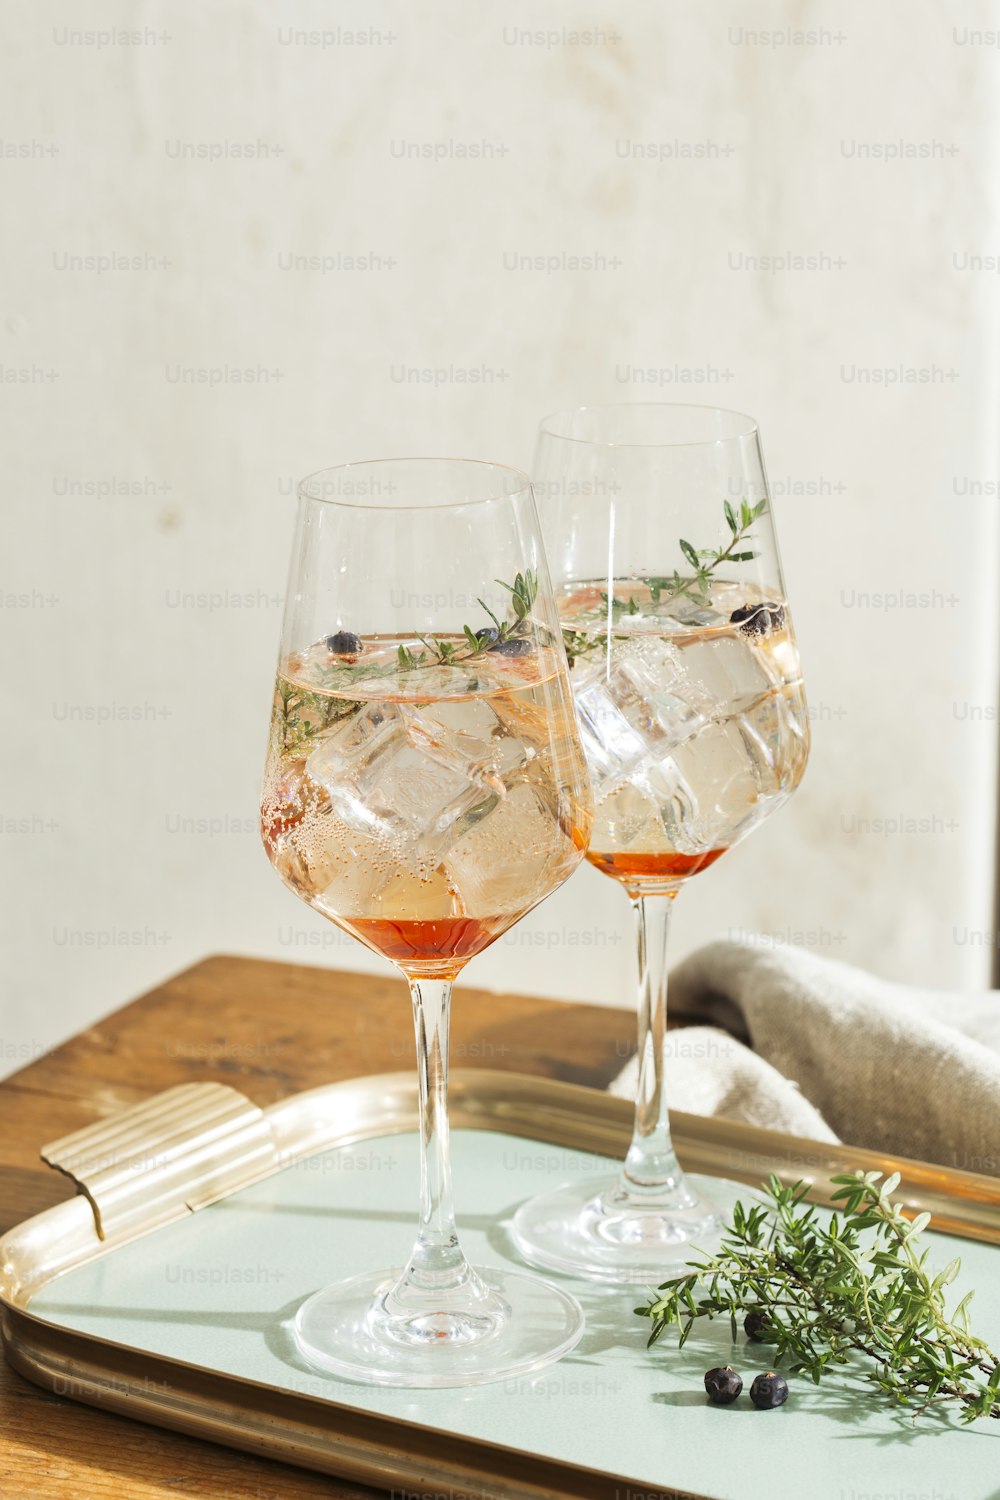 Prosecco cocktail, an aperitif with Prosecco, a white sparkling italian wine, bitter, thyme and juniper berries